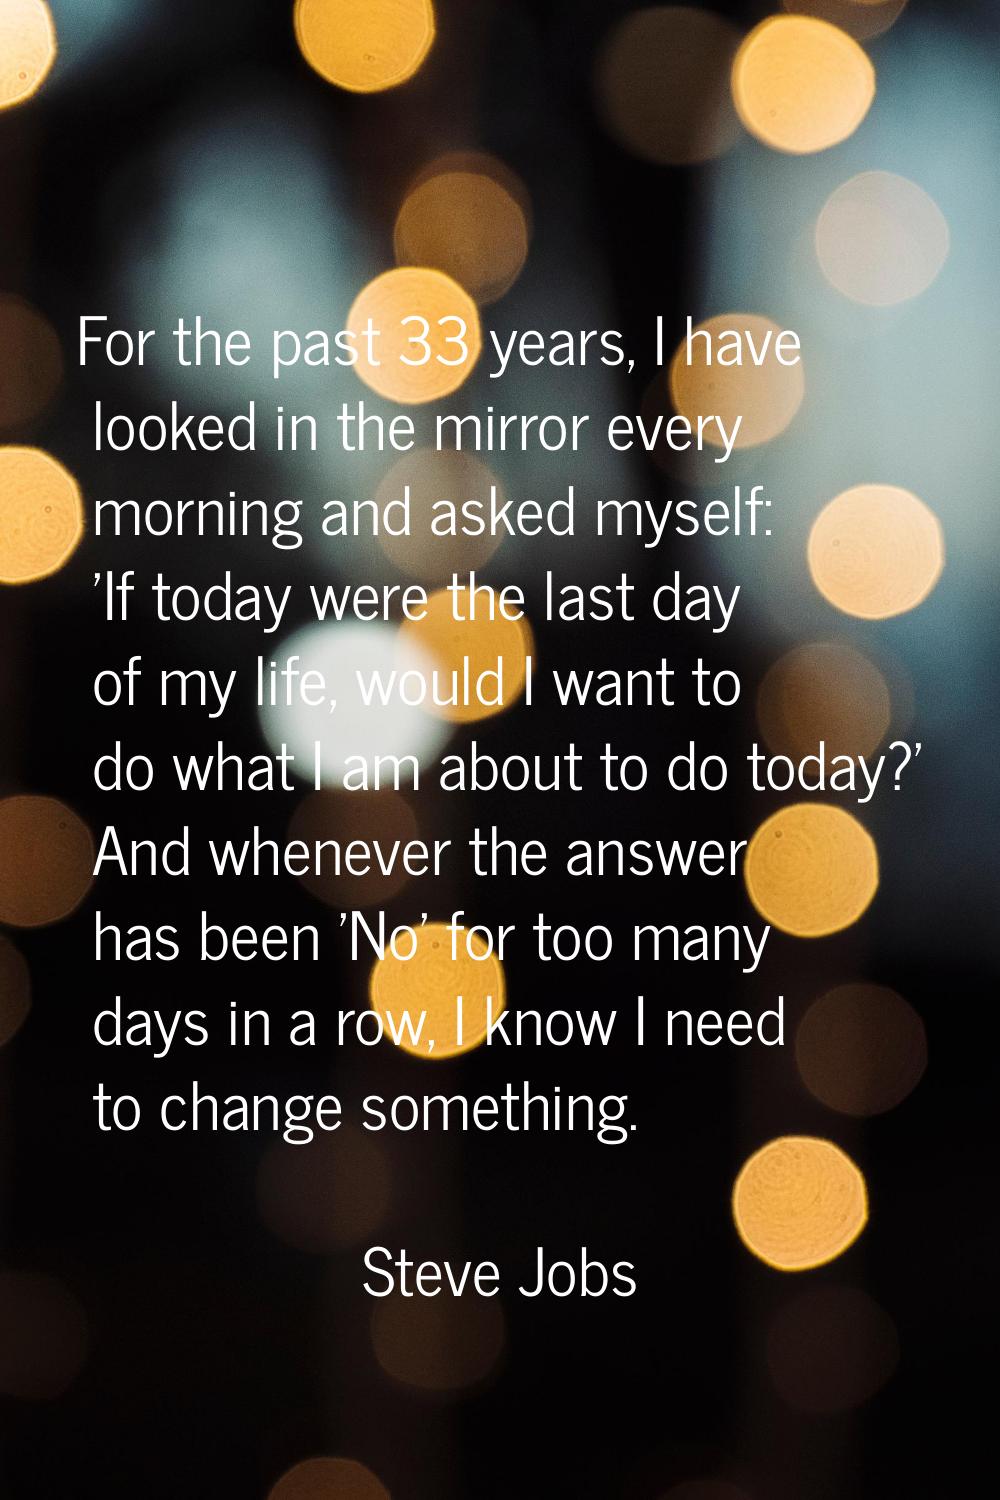 For the past 33 years, I have looked in the mirror every morning and asked myself: 'If today were t